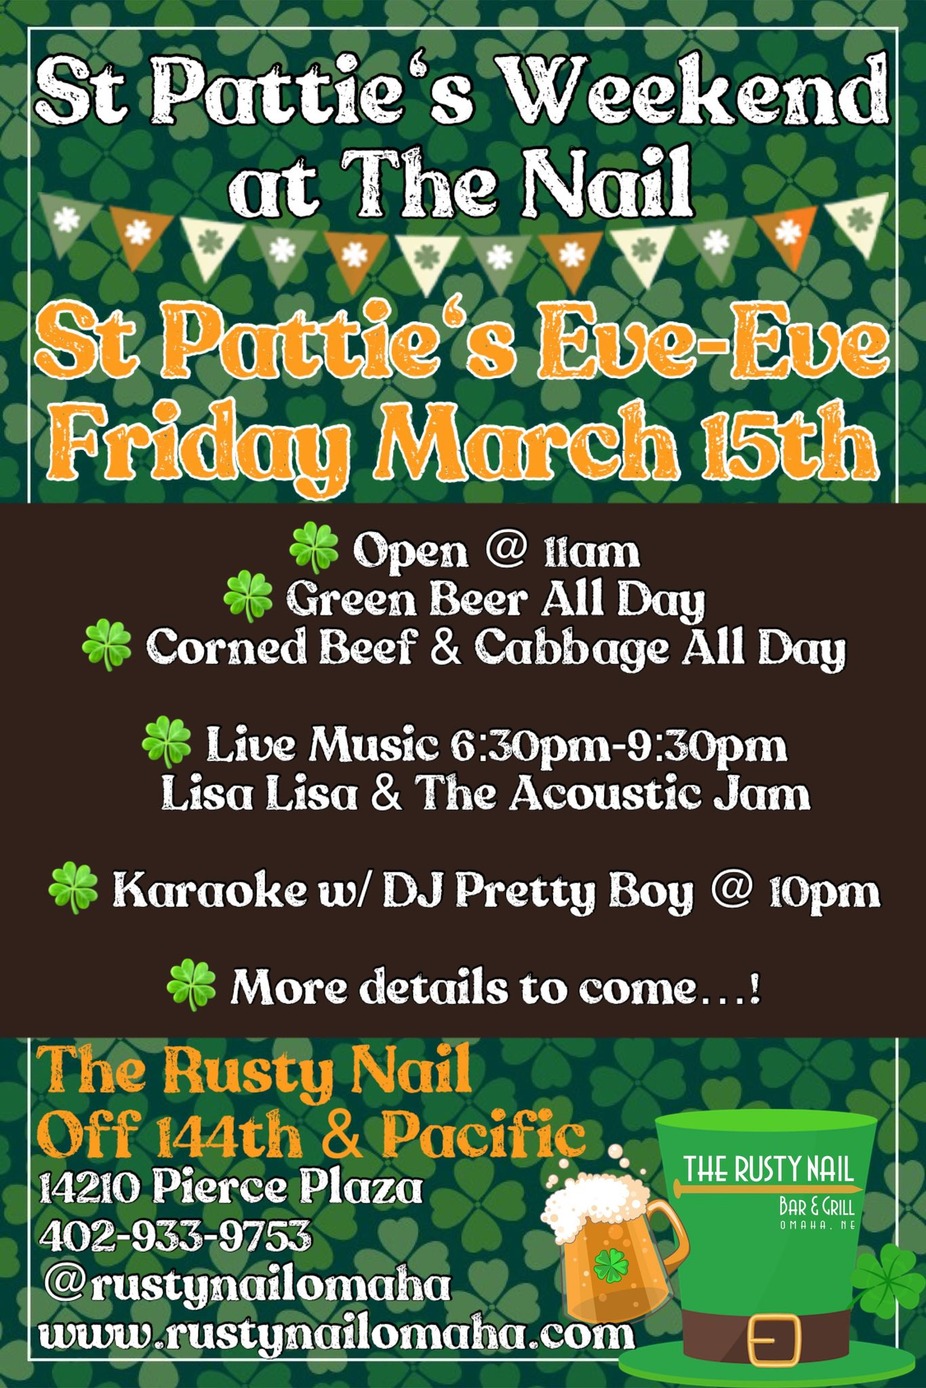 St Pattie’s Eve-Eve at The Nail w/ Live Music @ 6:30! event photo